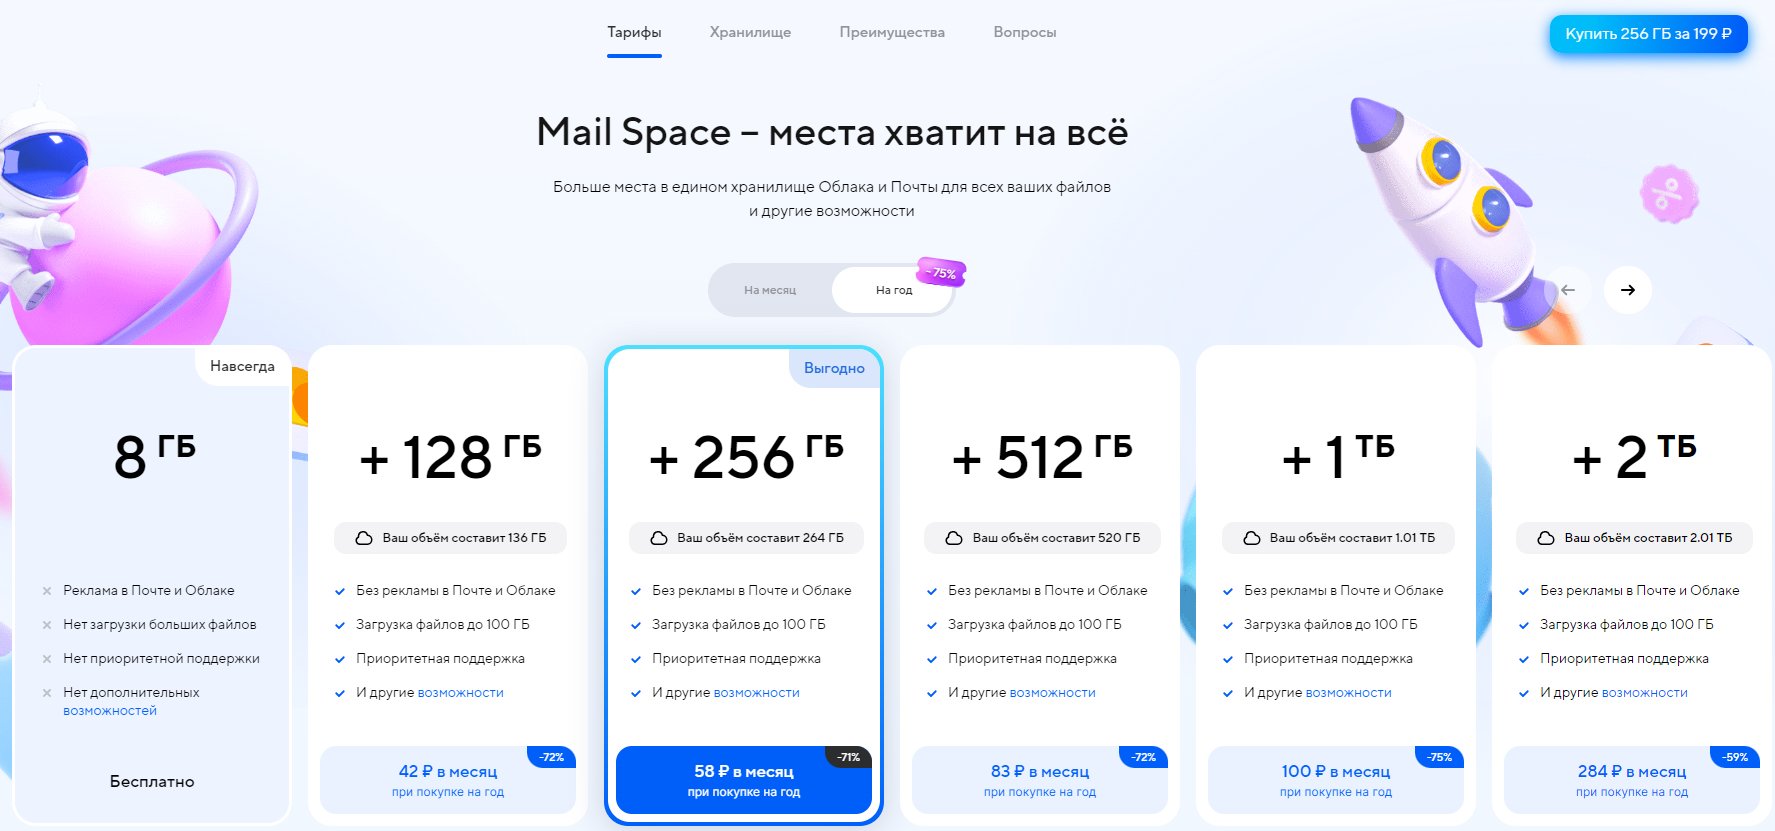 Mail.ru launches a single Mail Space subscription for "Mail" and "Cloud"